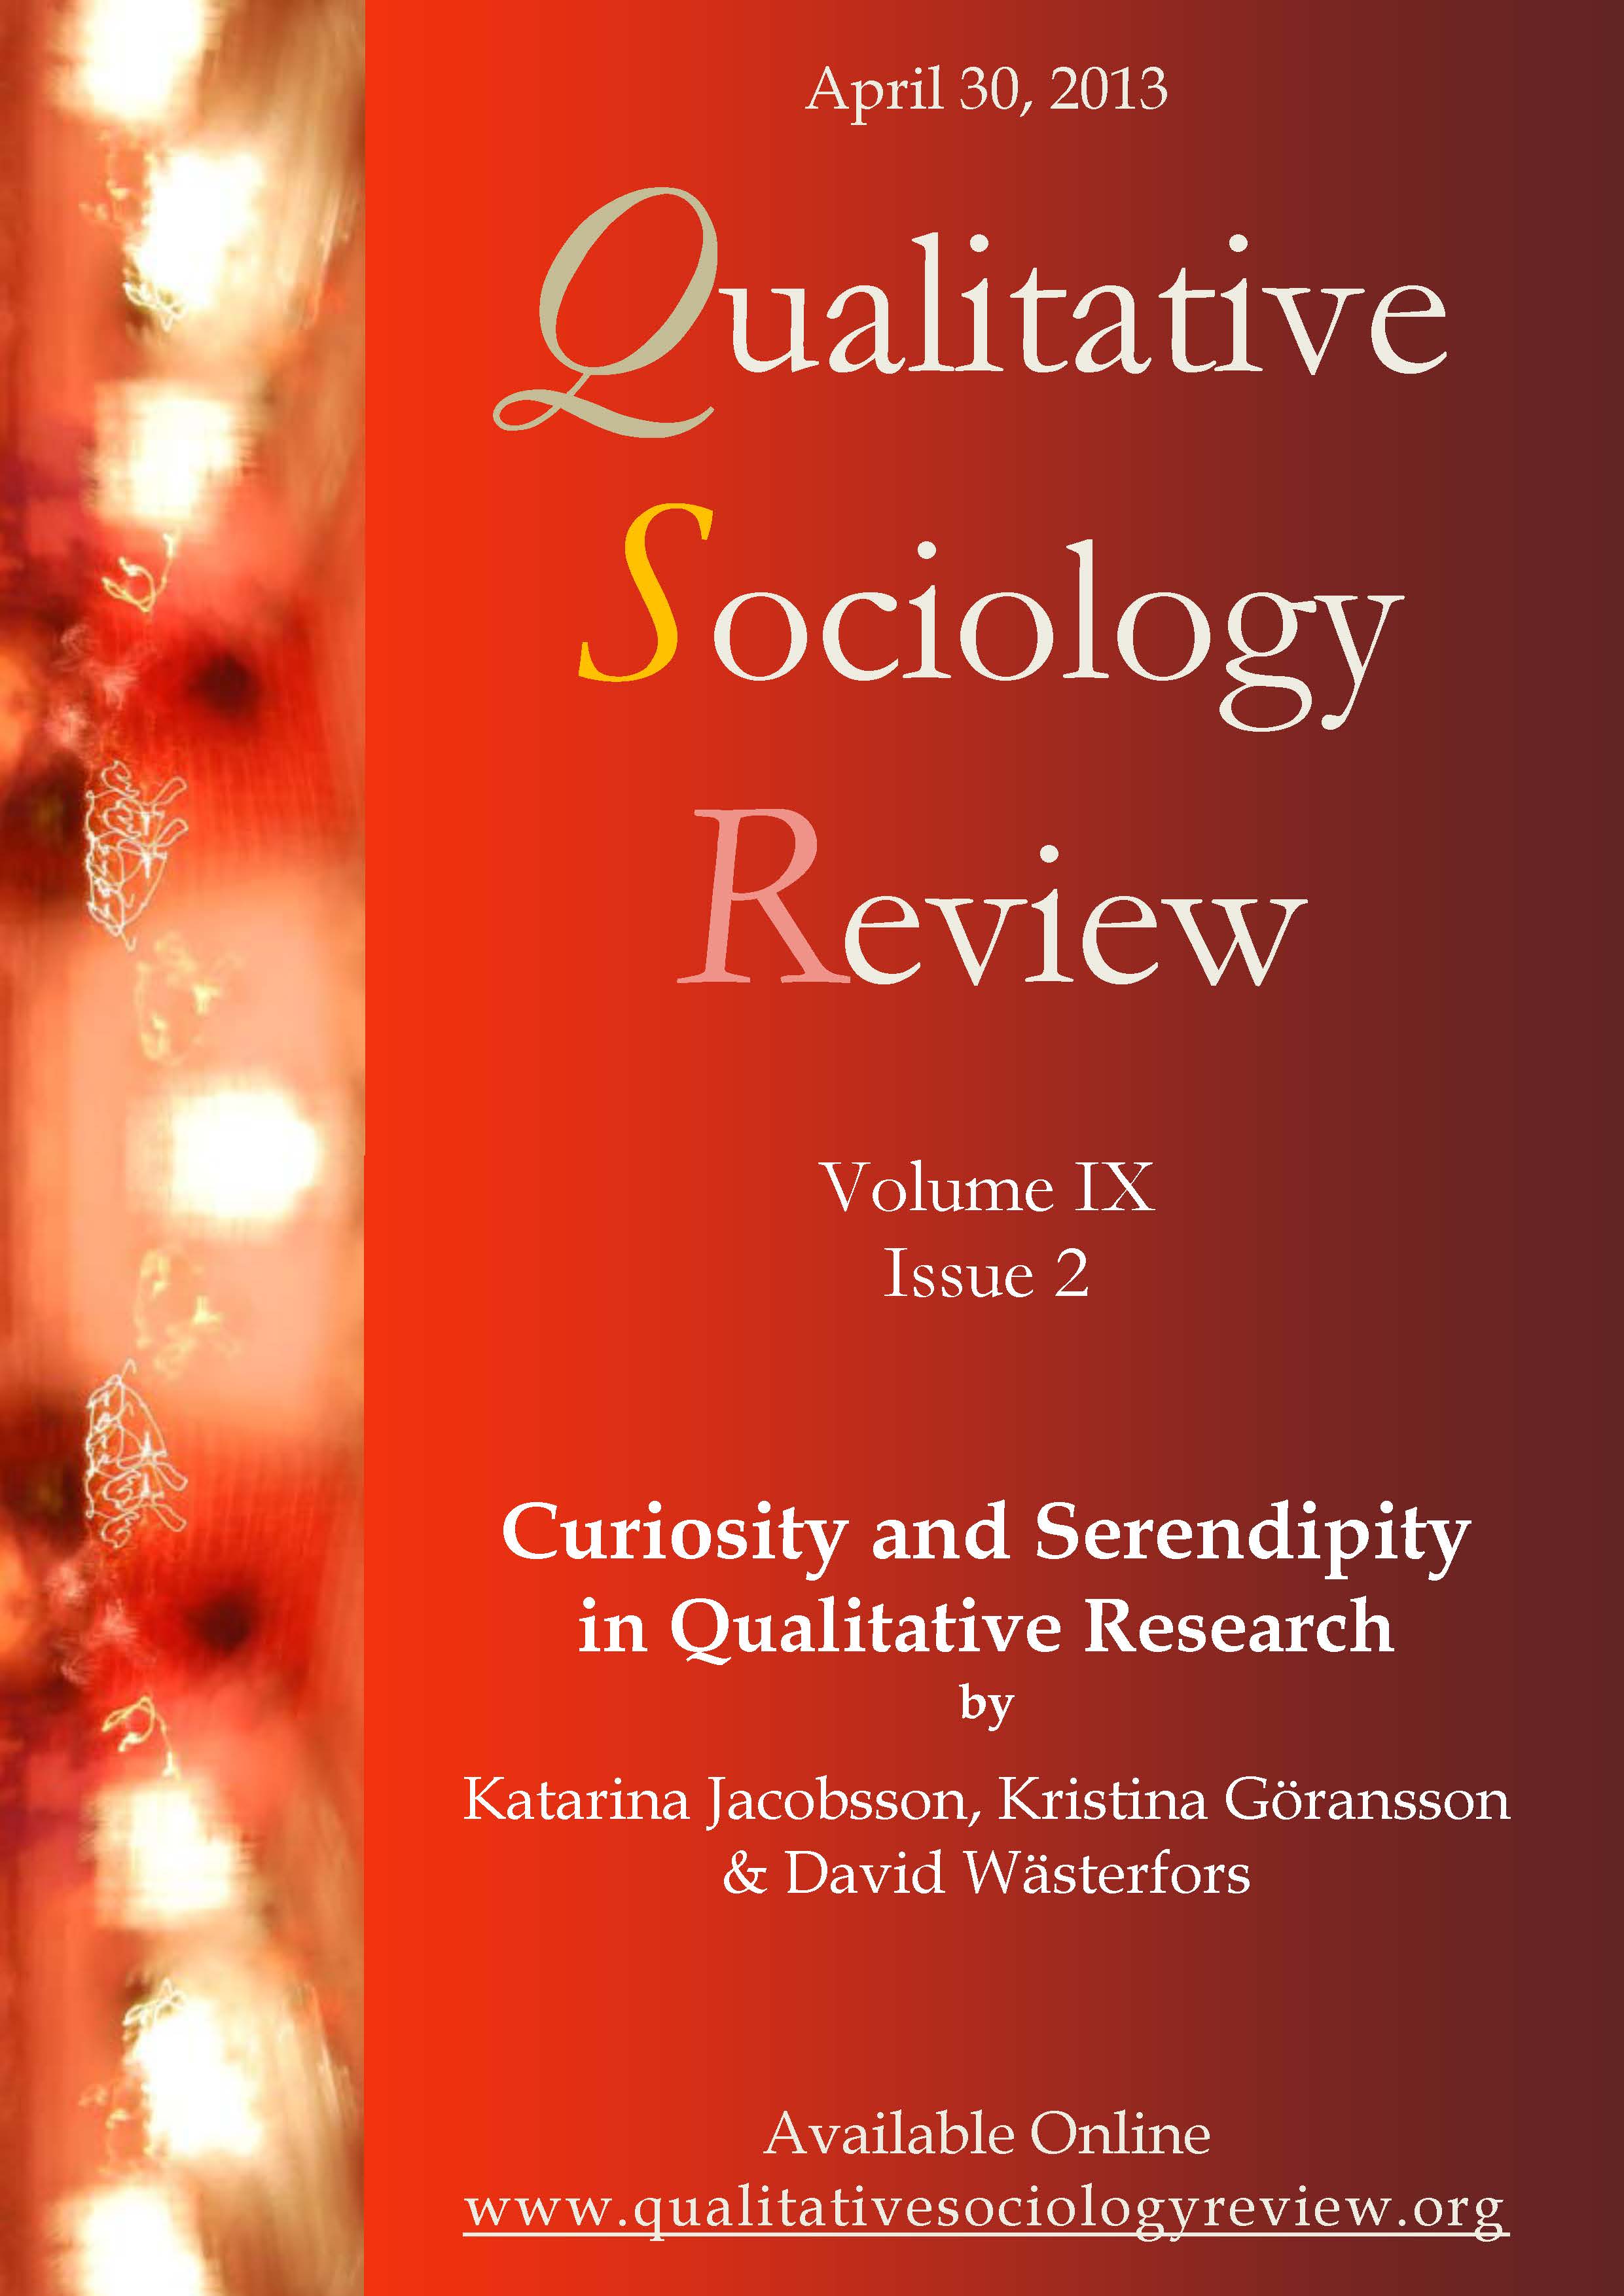 					View Vol. 9 No. 2 (2013): Curiosity and Serendipity  in Qualitative Research
				